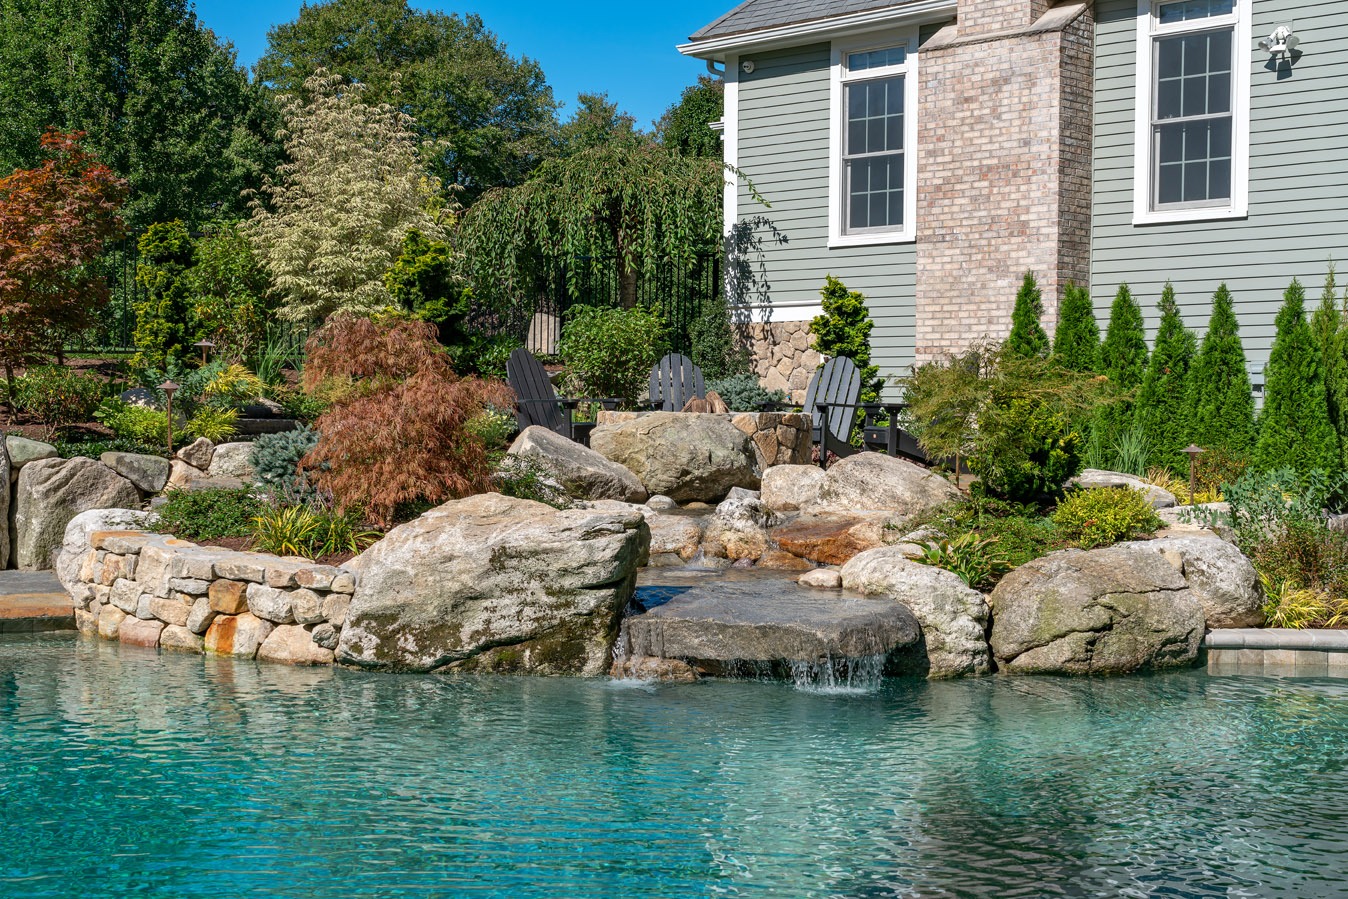 A backyard with a naturalistic swimming pool, waterfall, and landscaping, featuring rocks and diverse plants beside a house with Adirondack chairs.